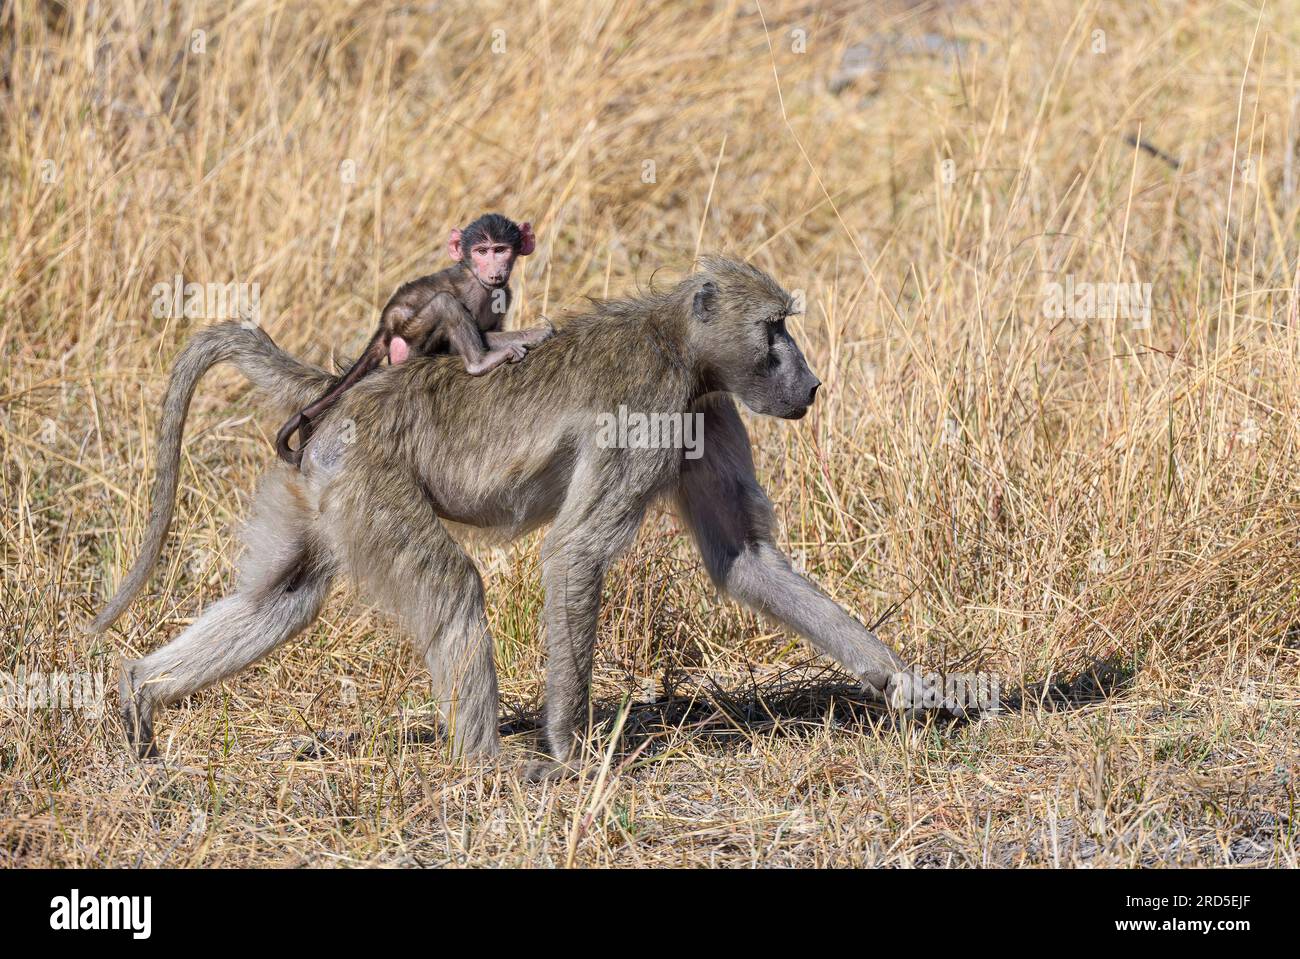 Baby Chacma baboon riding on mother's back Stock Photo